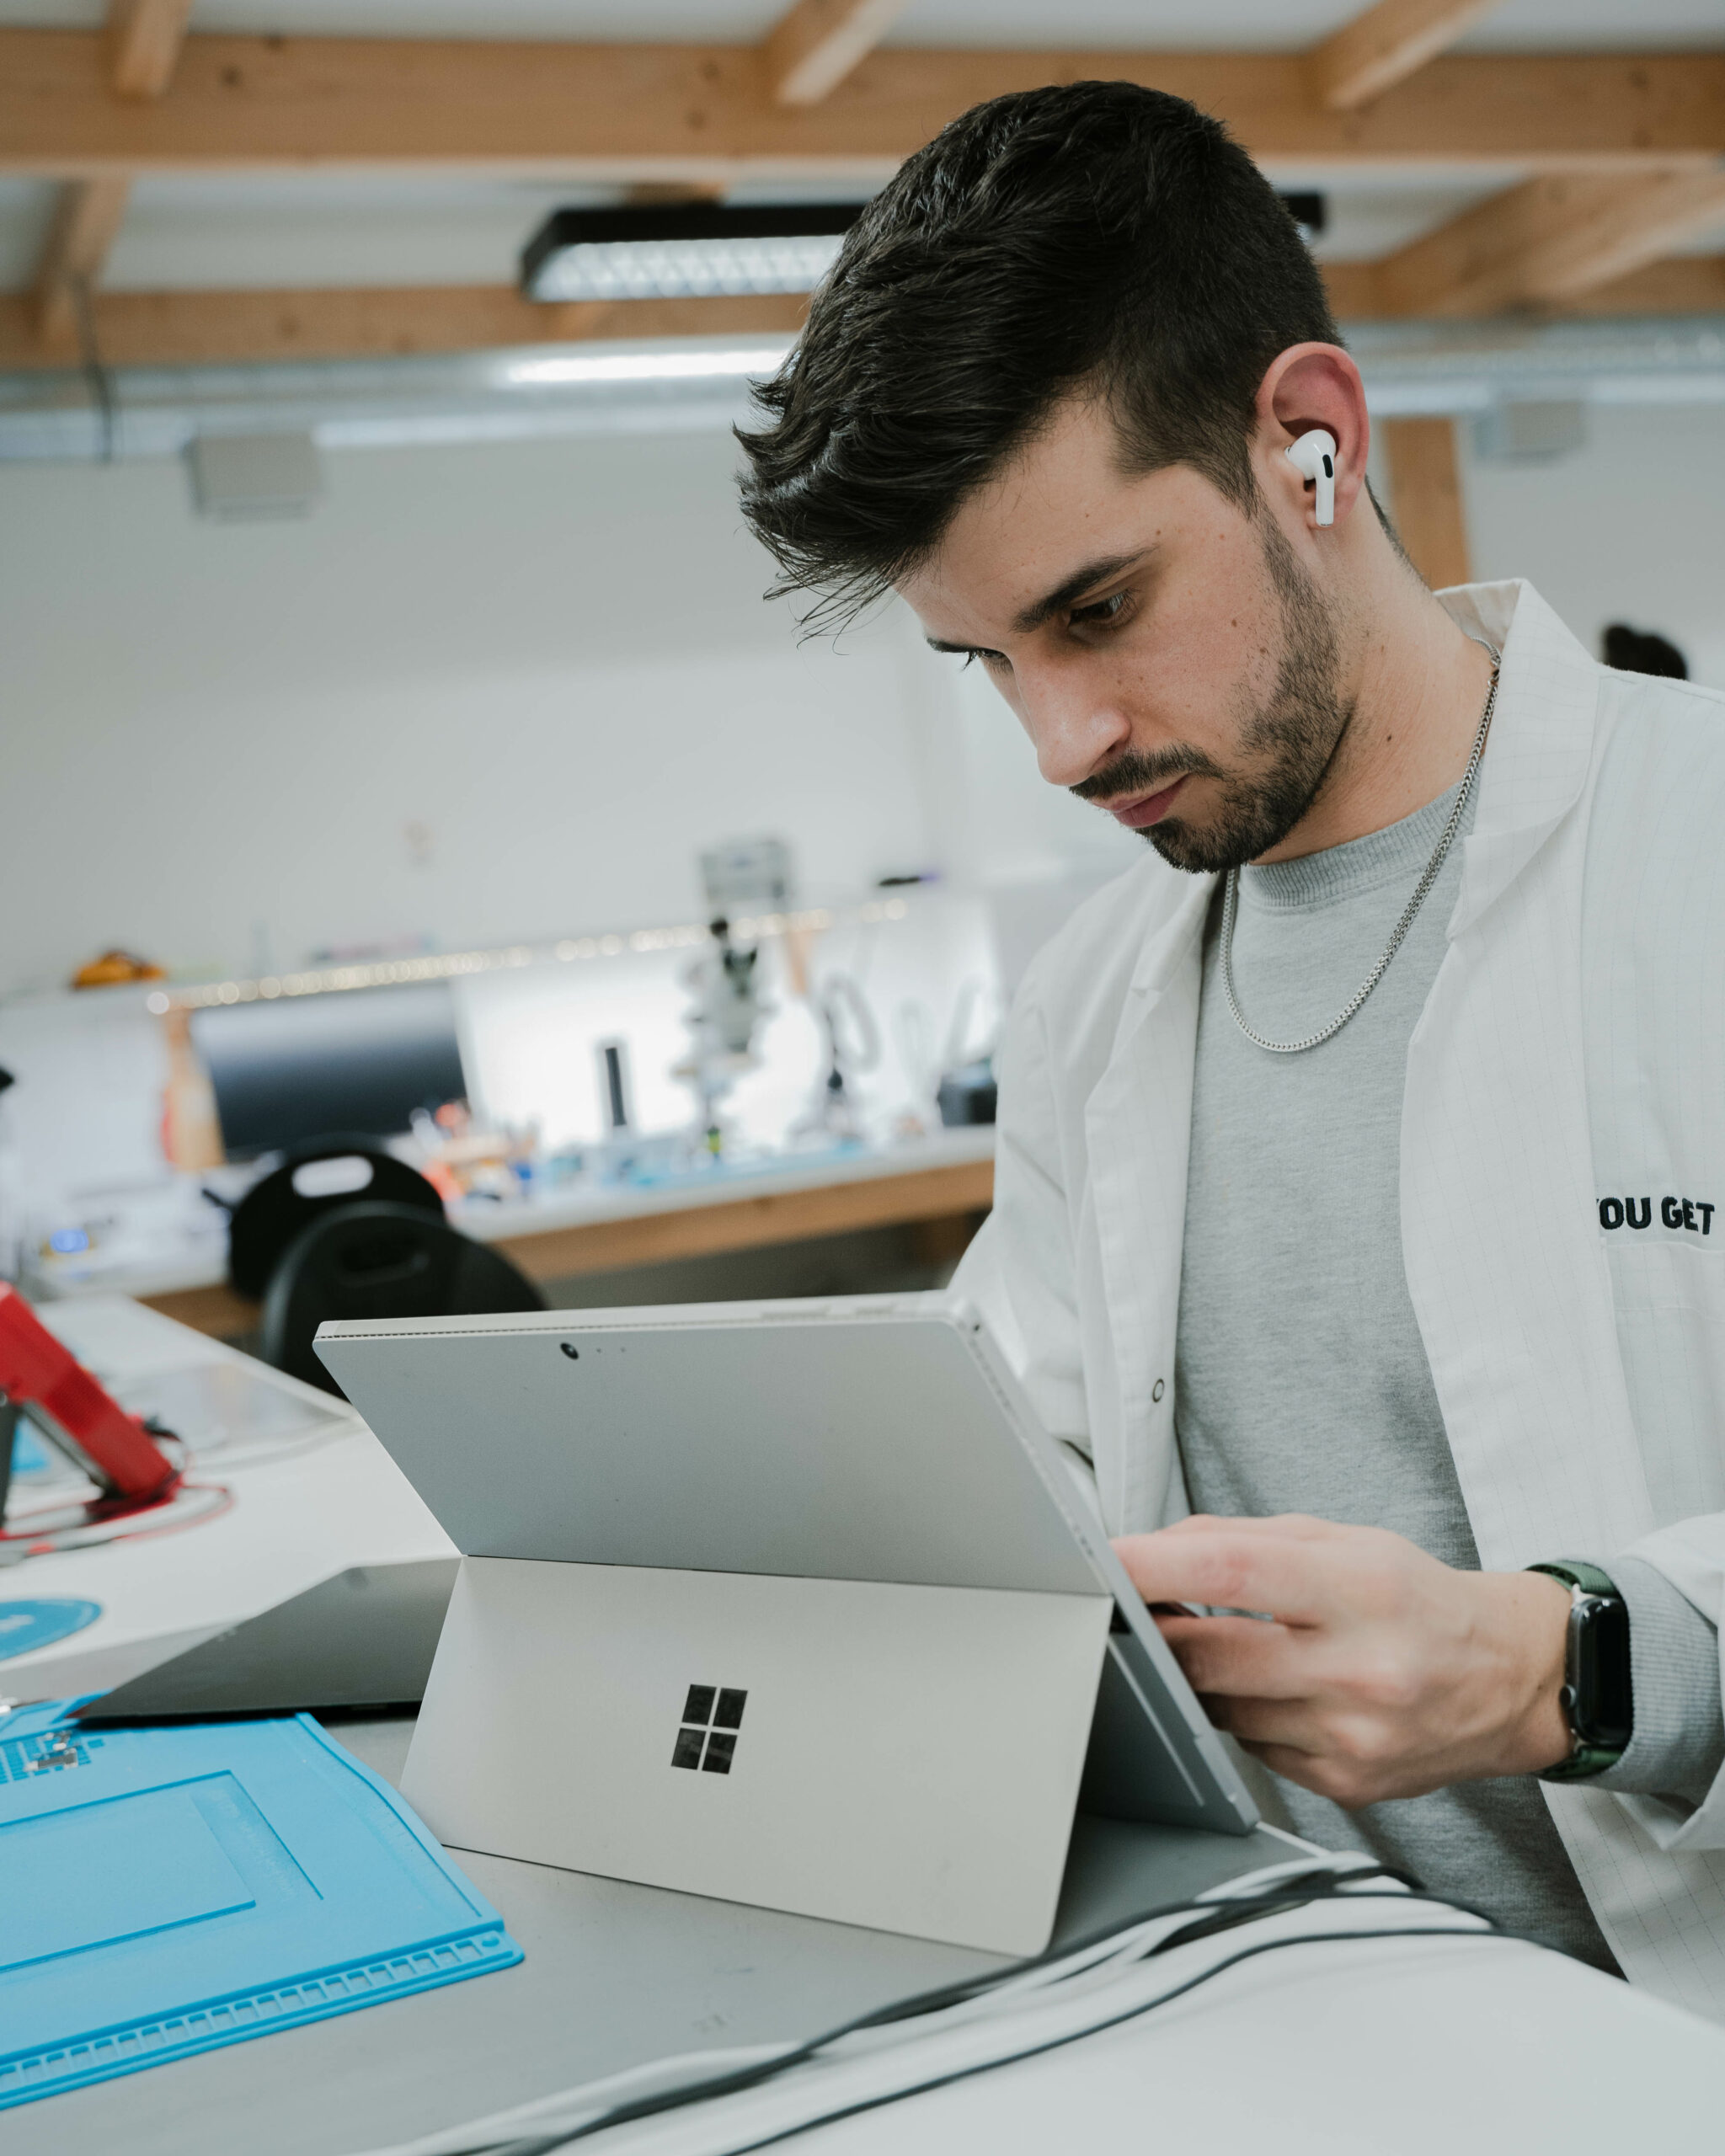 surface-microsoft-youget